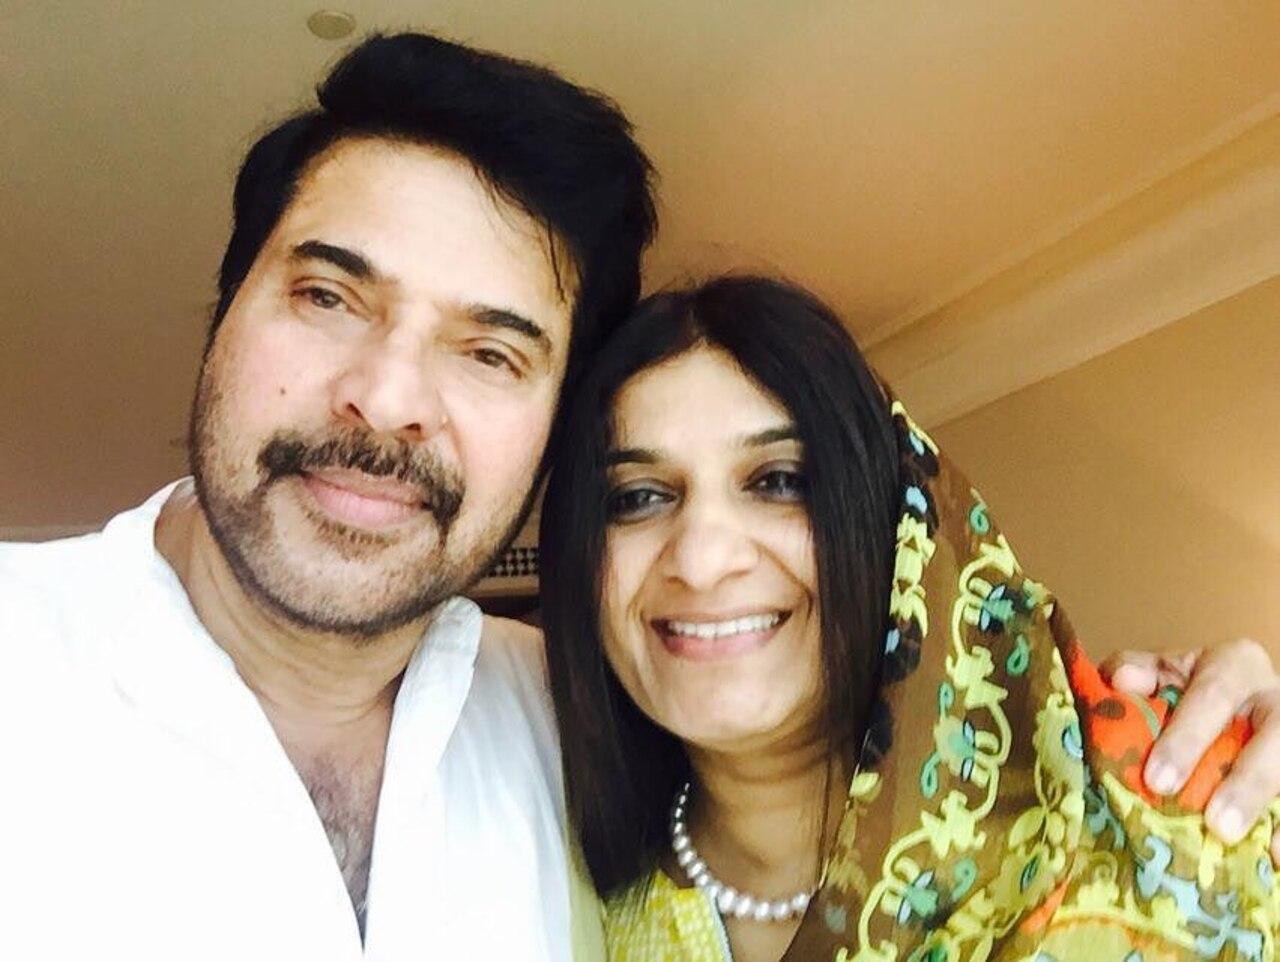 Mammootty and his wife wlecomed their first child, a daughter named Surumi in 1982. Their son Dulquer Salmaan was born in 1983